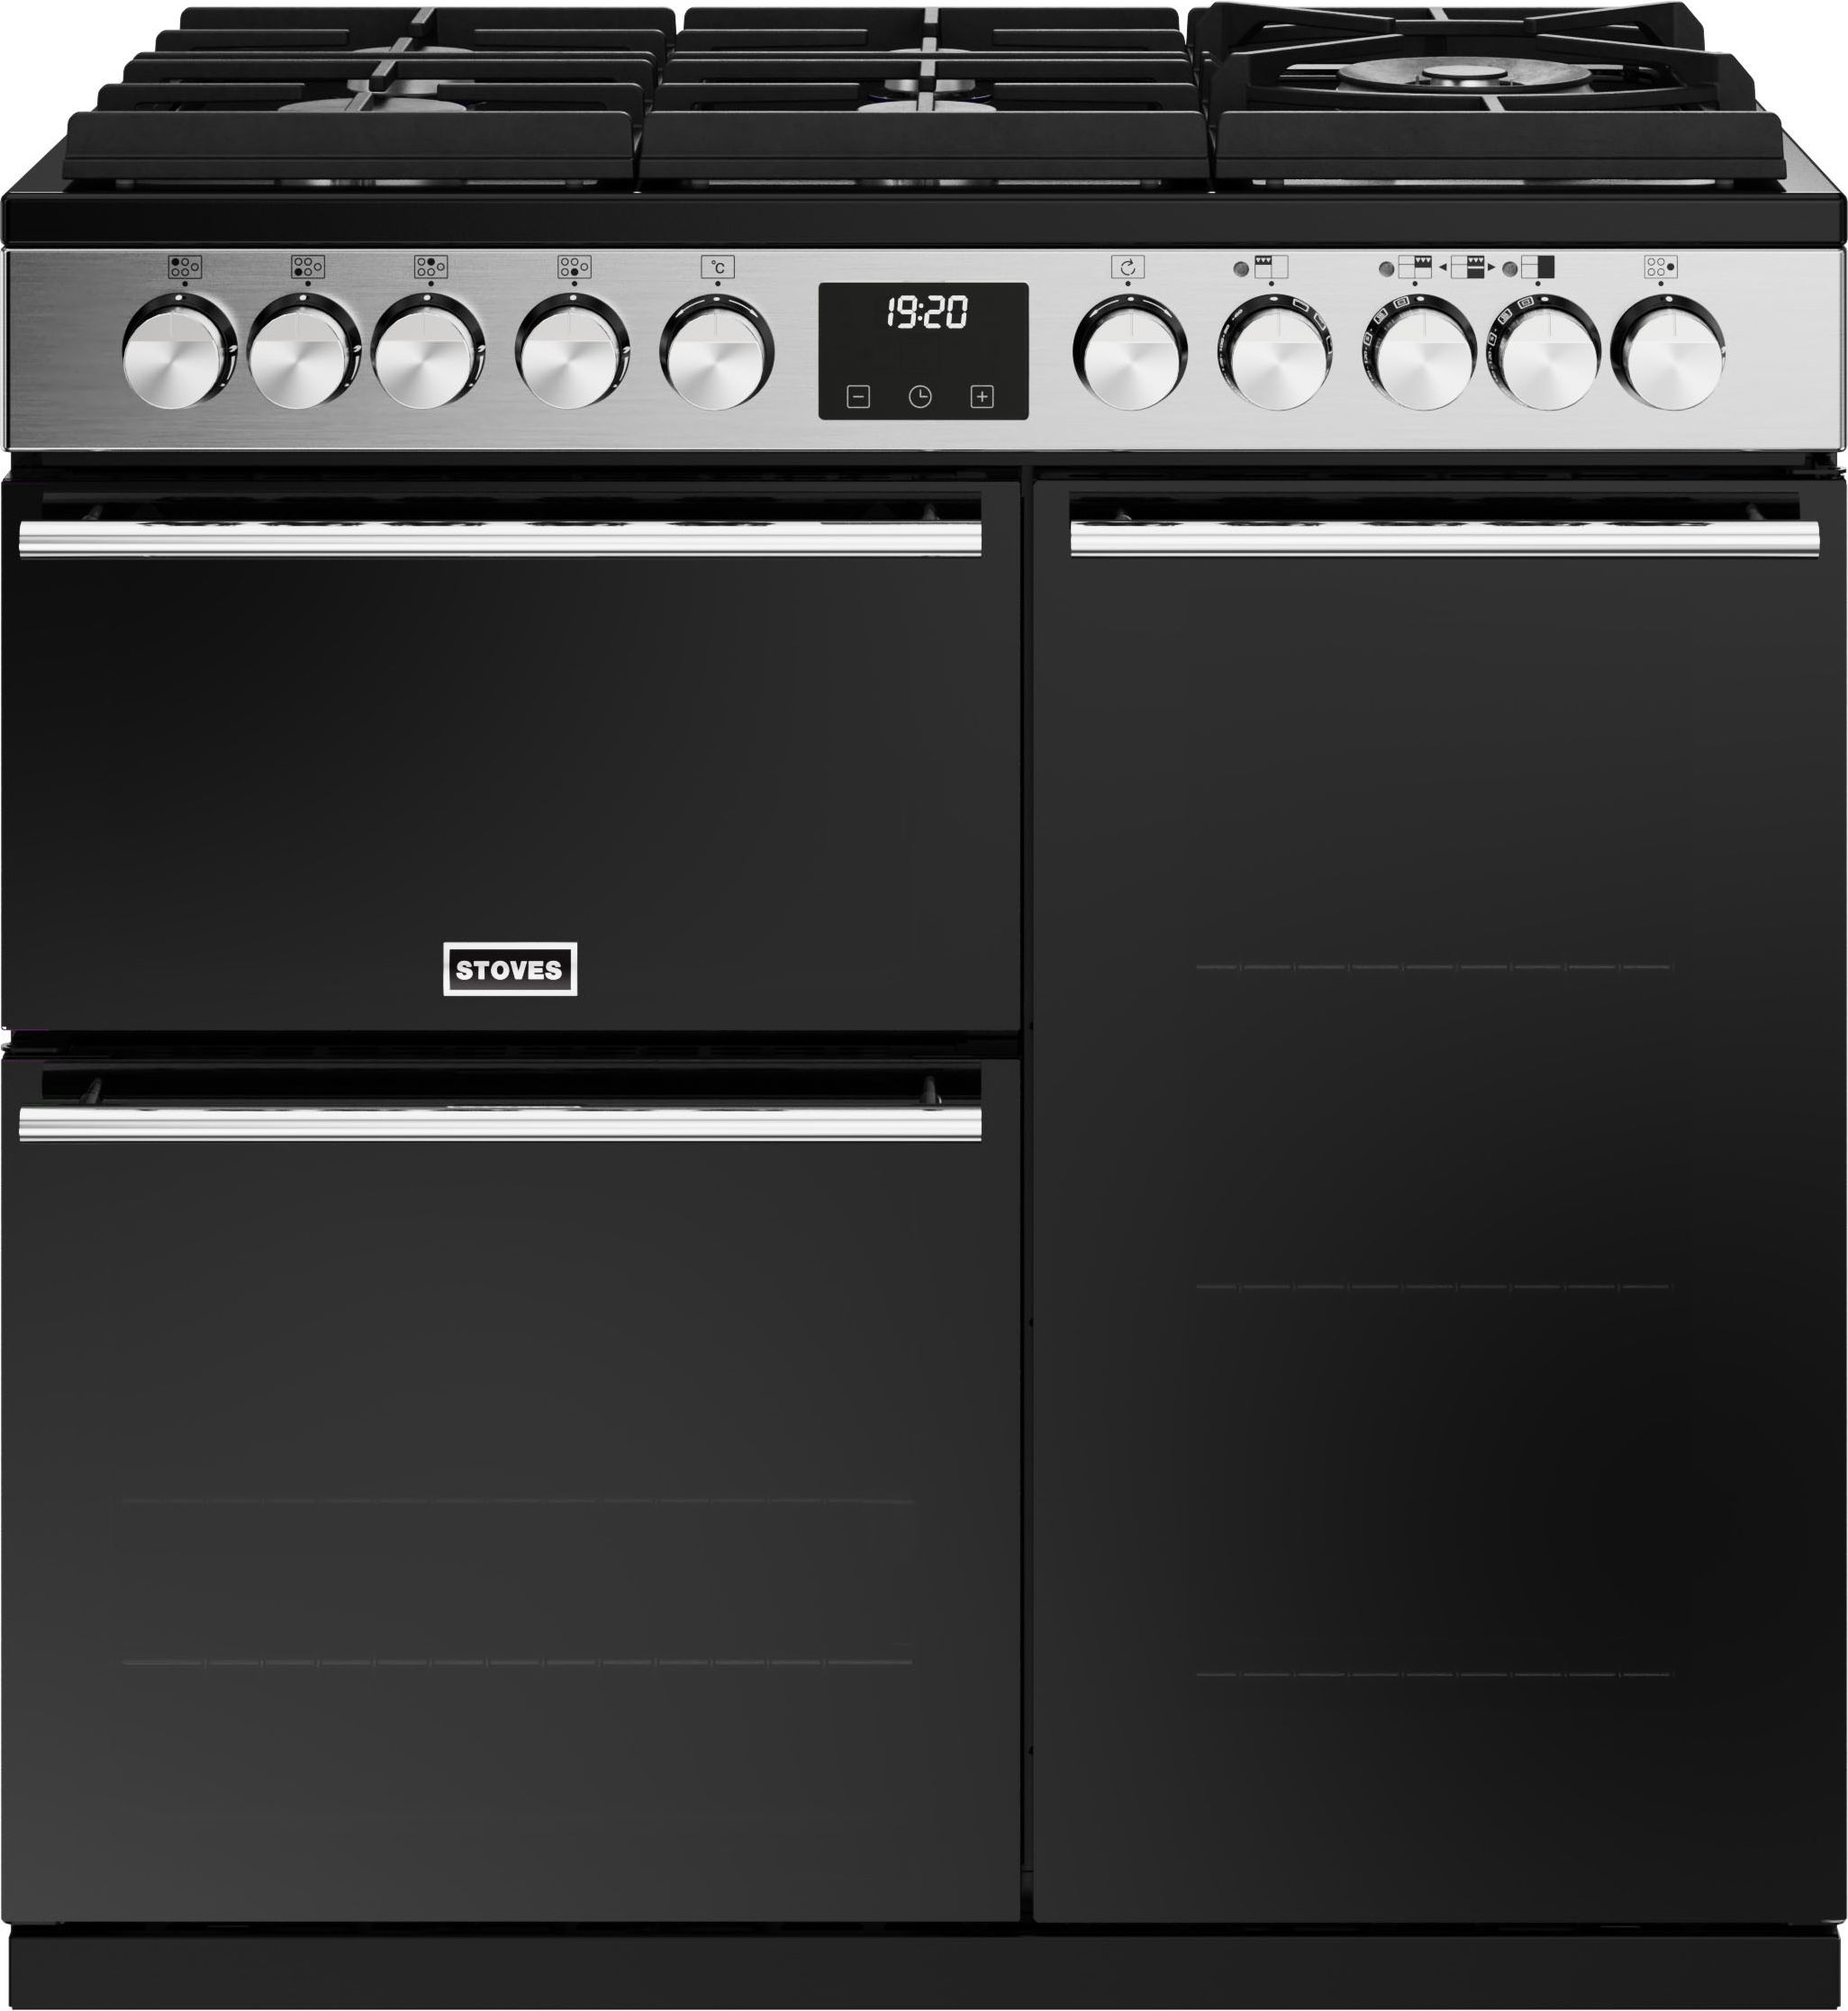 Stoves Precision Deluxe ST DX PREC D900DF GTG SS 90cm Dual Fuel Range Cooker - Stainless Steel / Black - A/A/A Rated, Stainless Steel